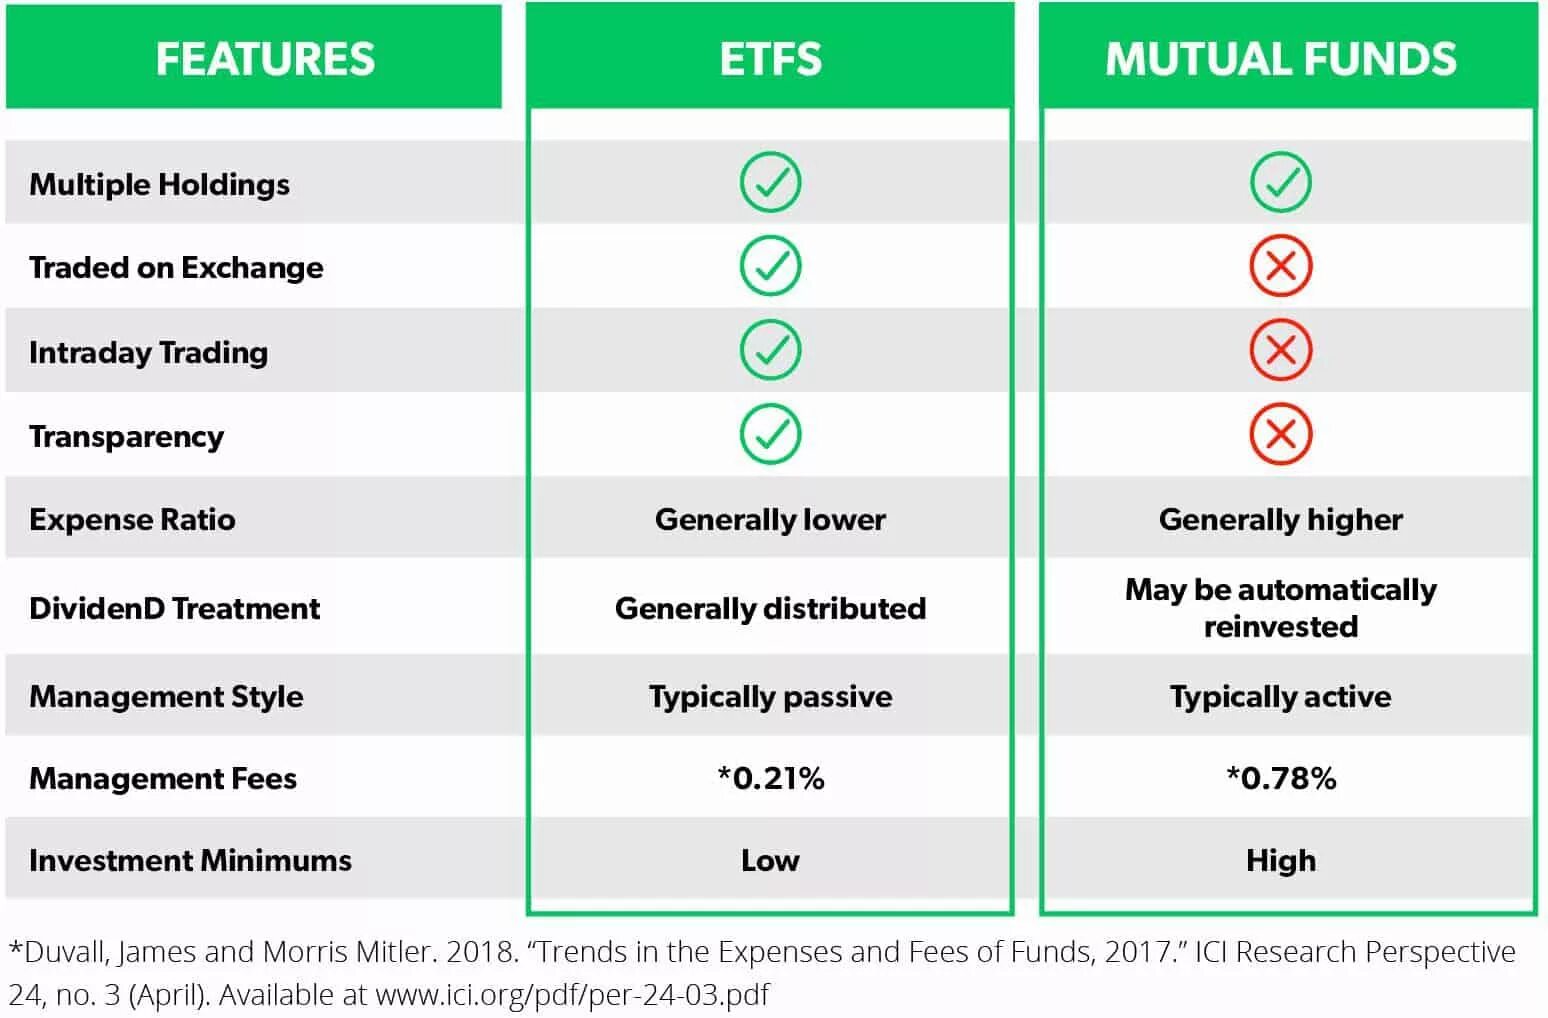 Etf сроки. Mutual Funds vs ETF. Management of mutual Funds. Инвестиционные фонды ETF. Sources & uses of Funds образец.